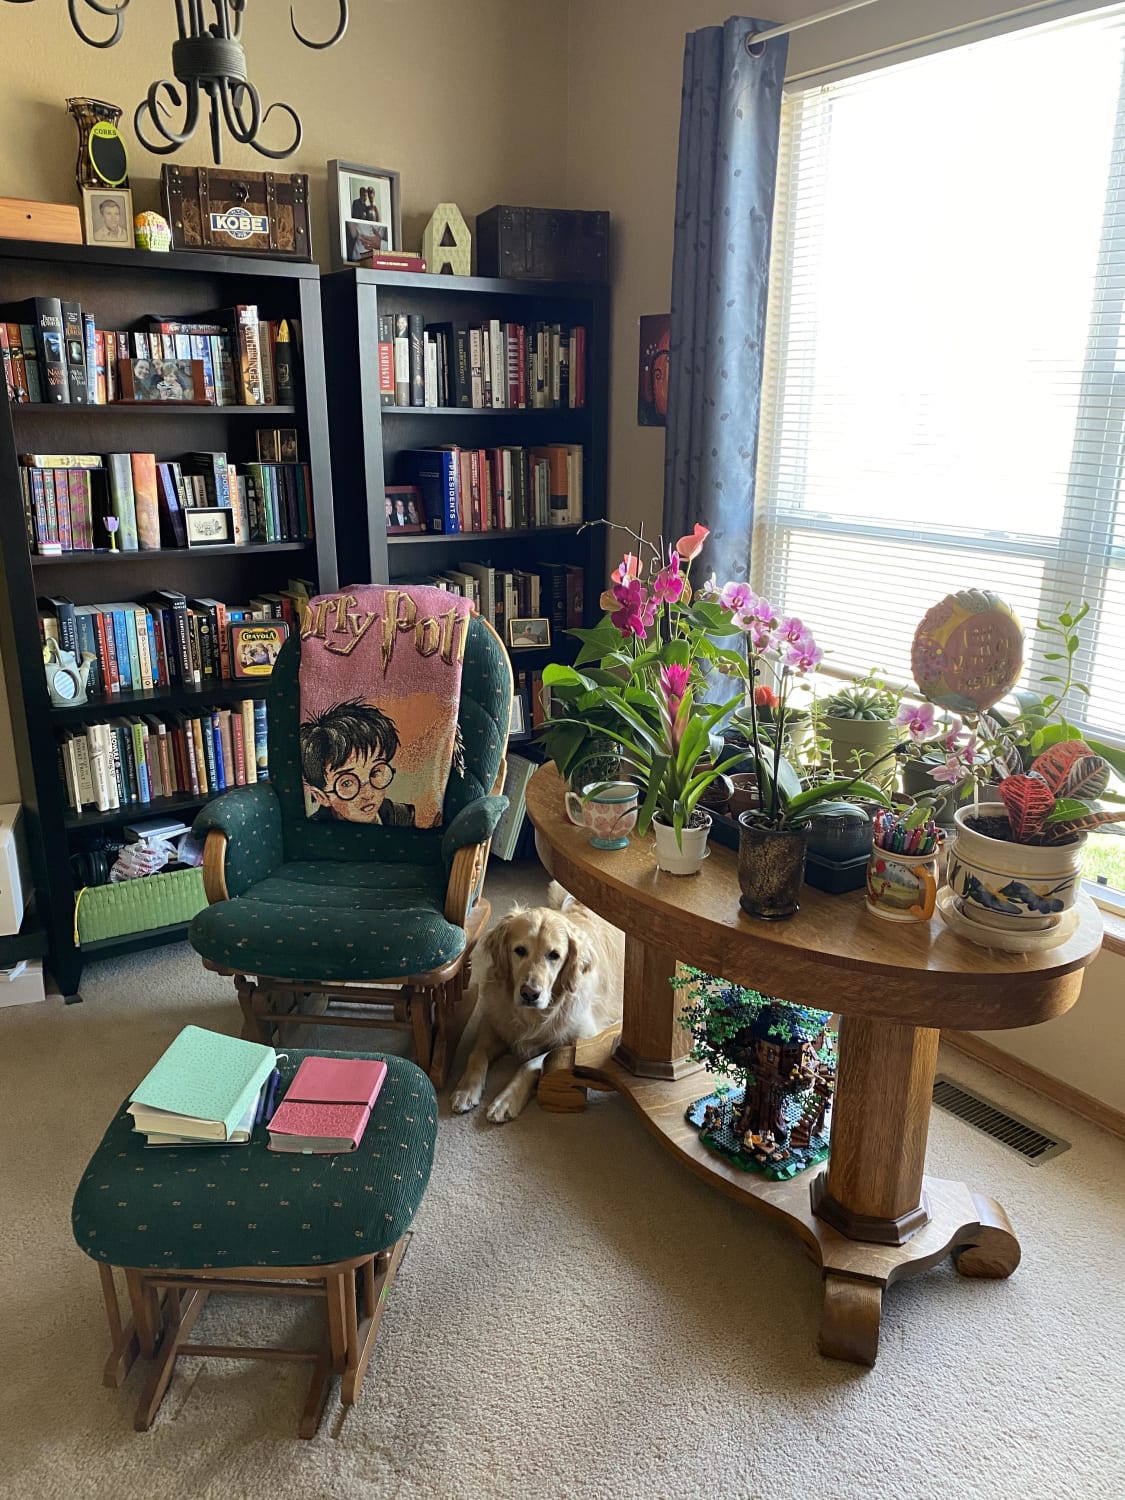 Plants, books, a dog. I think my cozy space is finished.